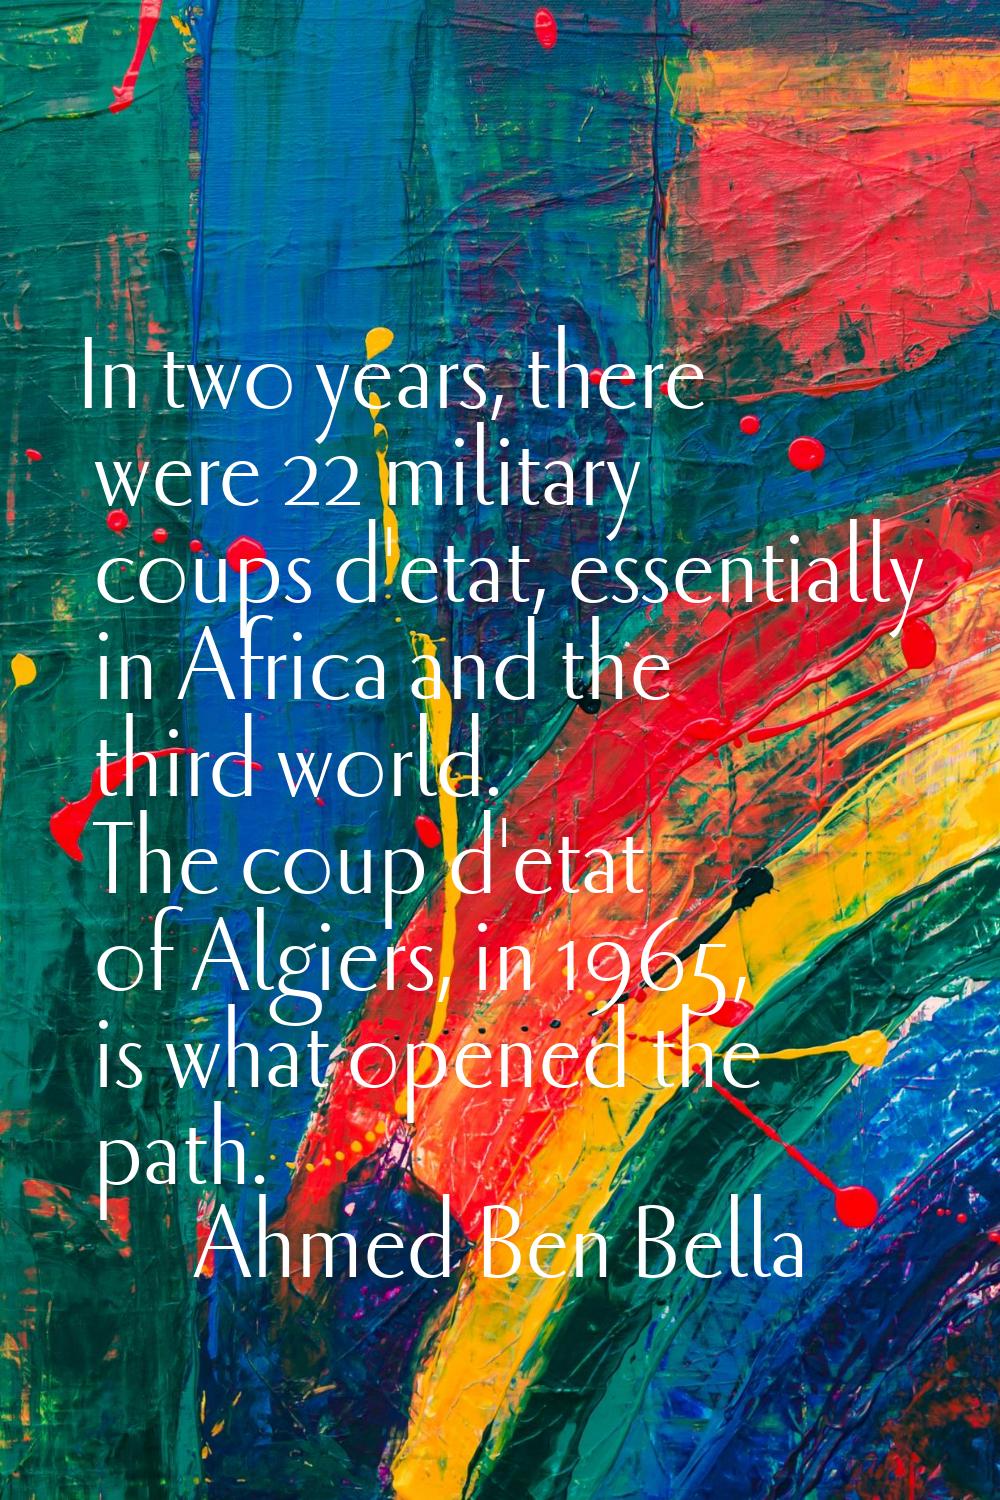 In two years, there were 22 military coups d'etat, essentially in Africa and the third world. The c